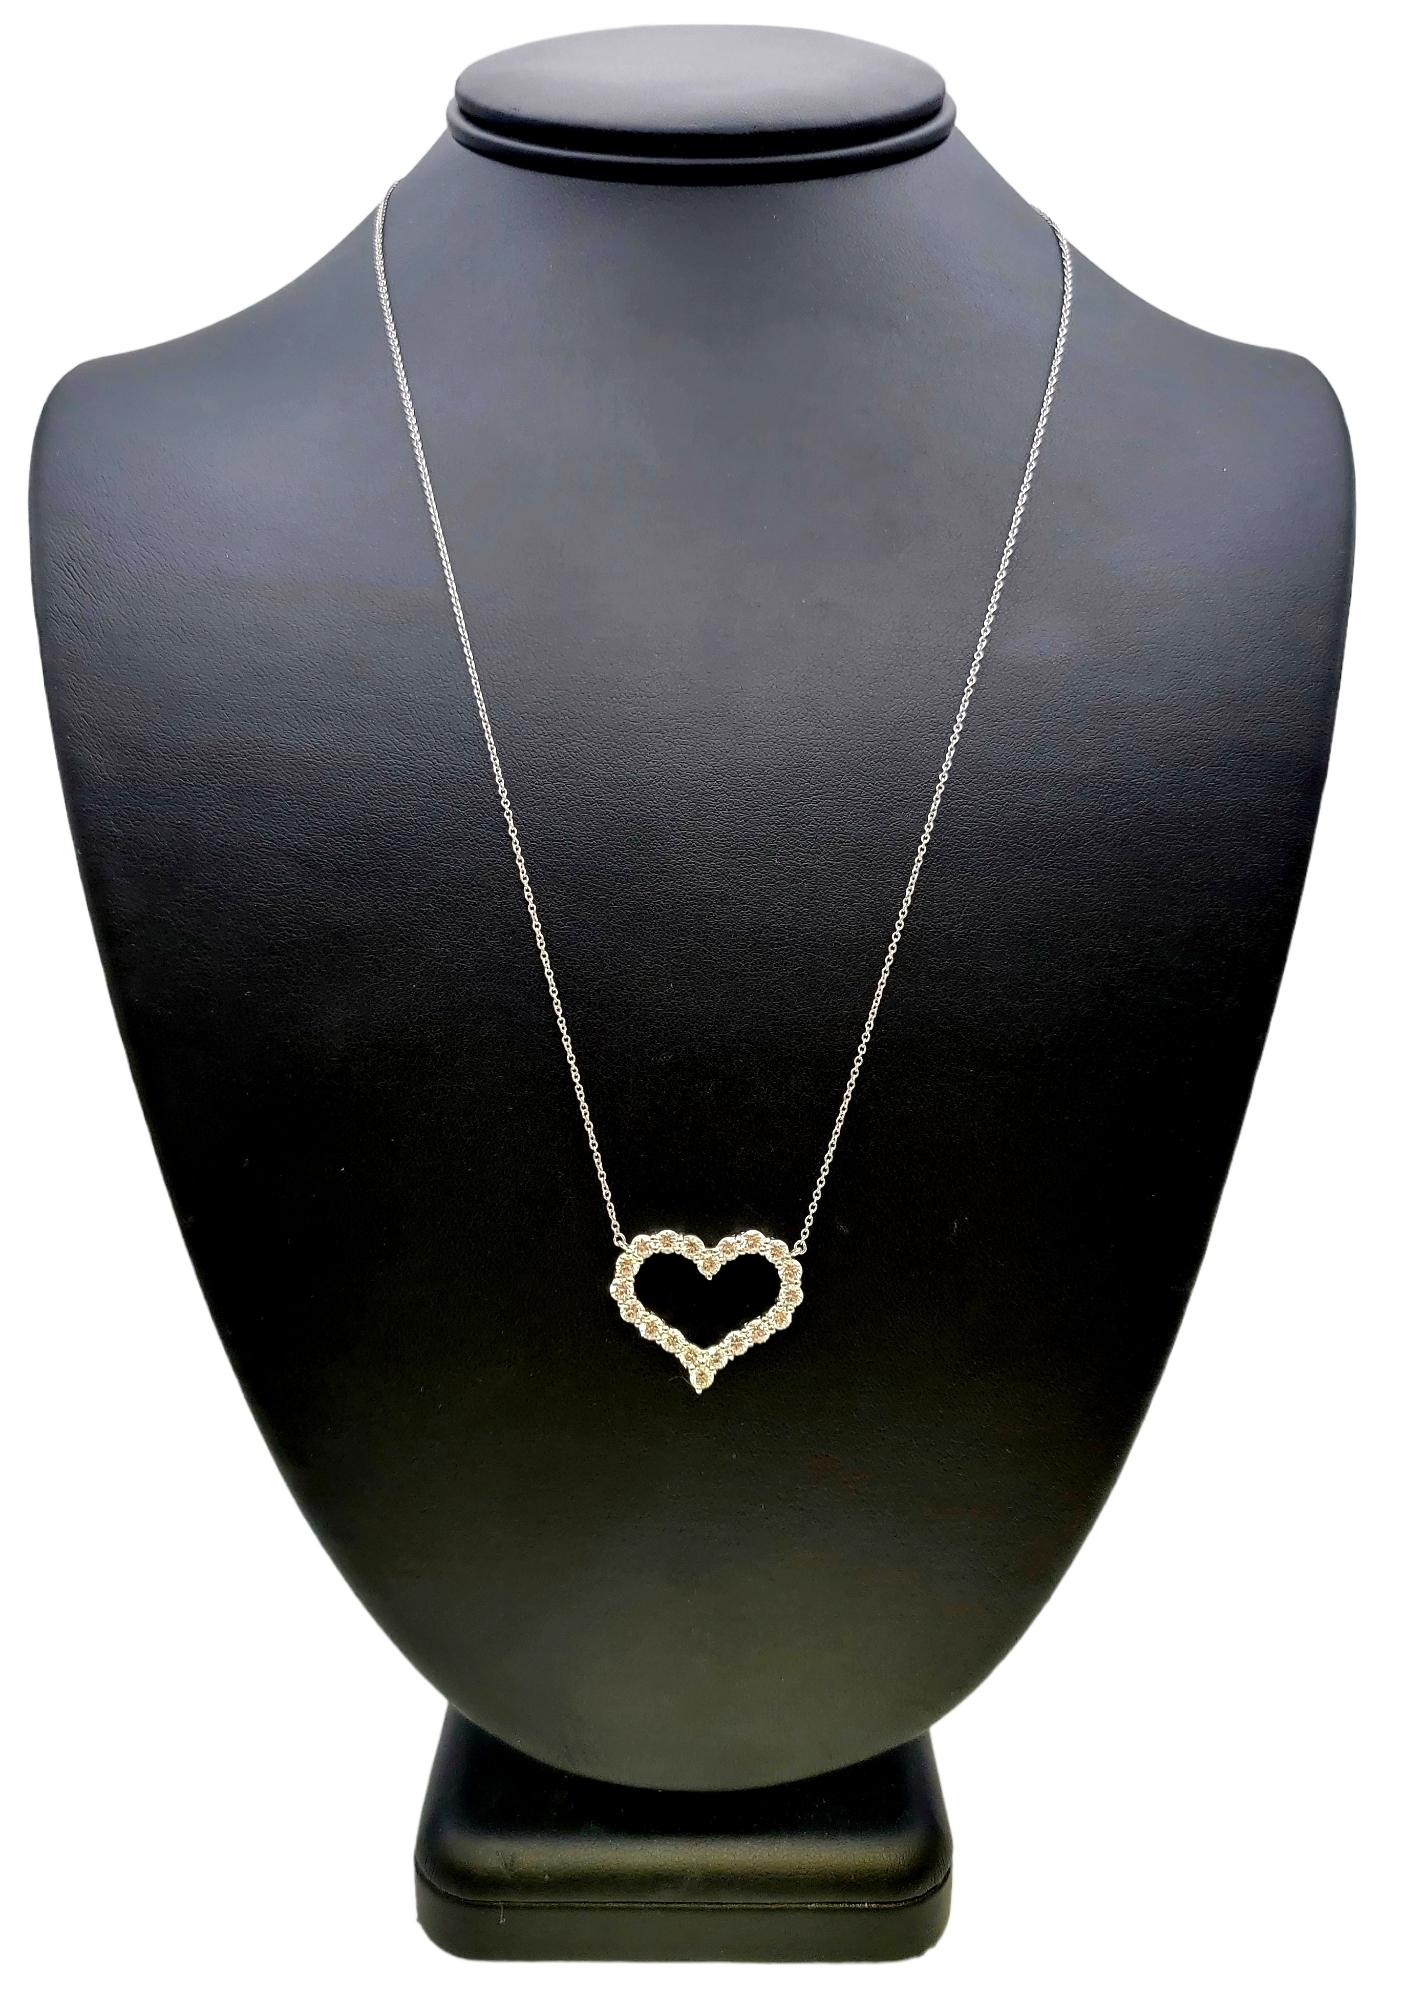 Tiffany & Co. Large Diamond Open Heart Pendant in Platinum on a Necklace 7